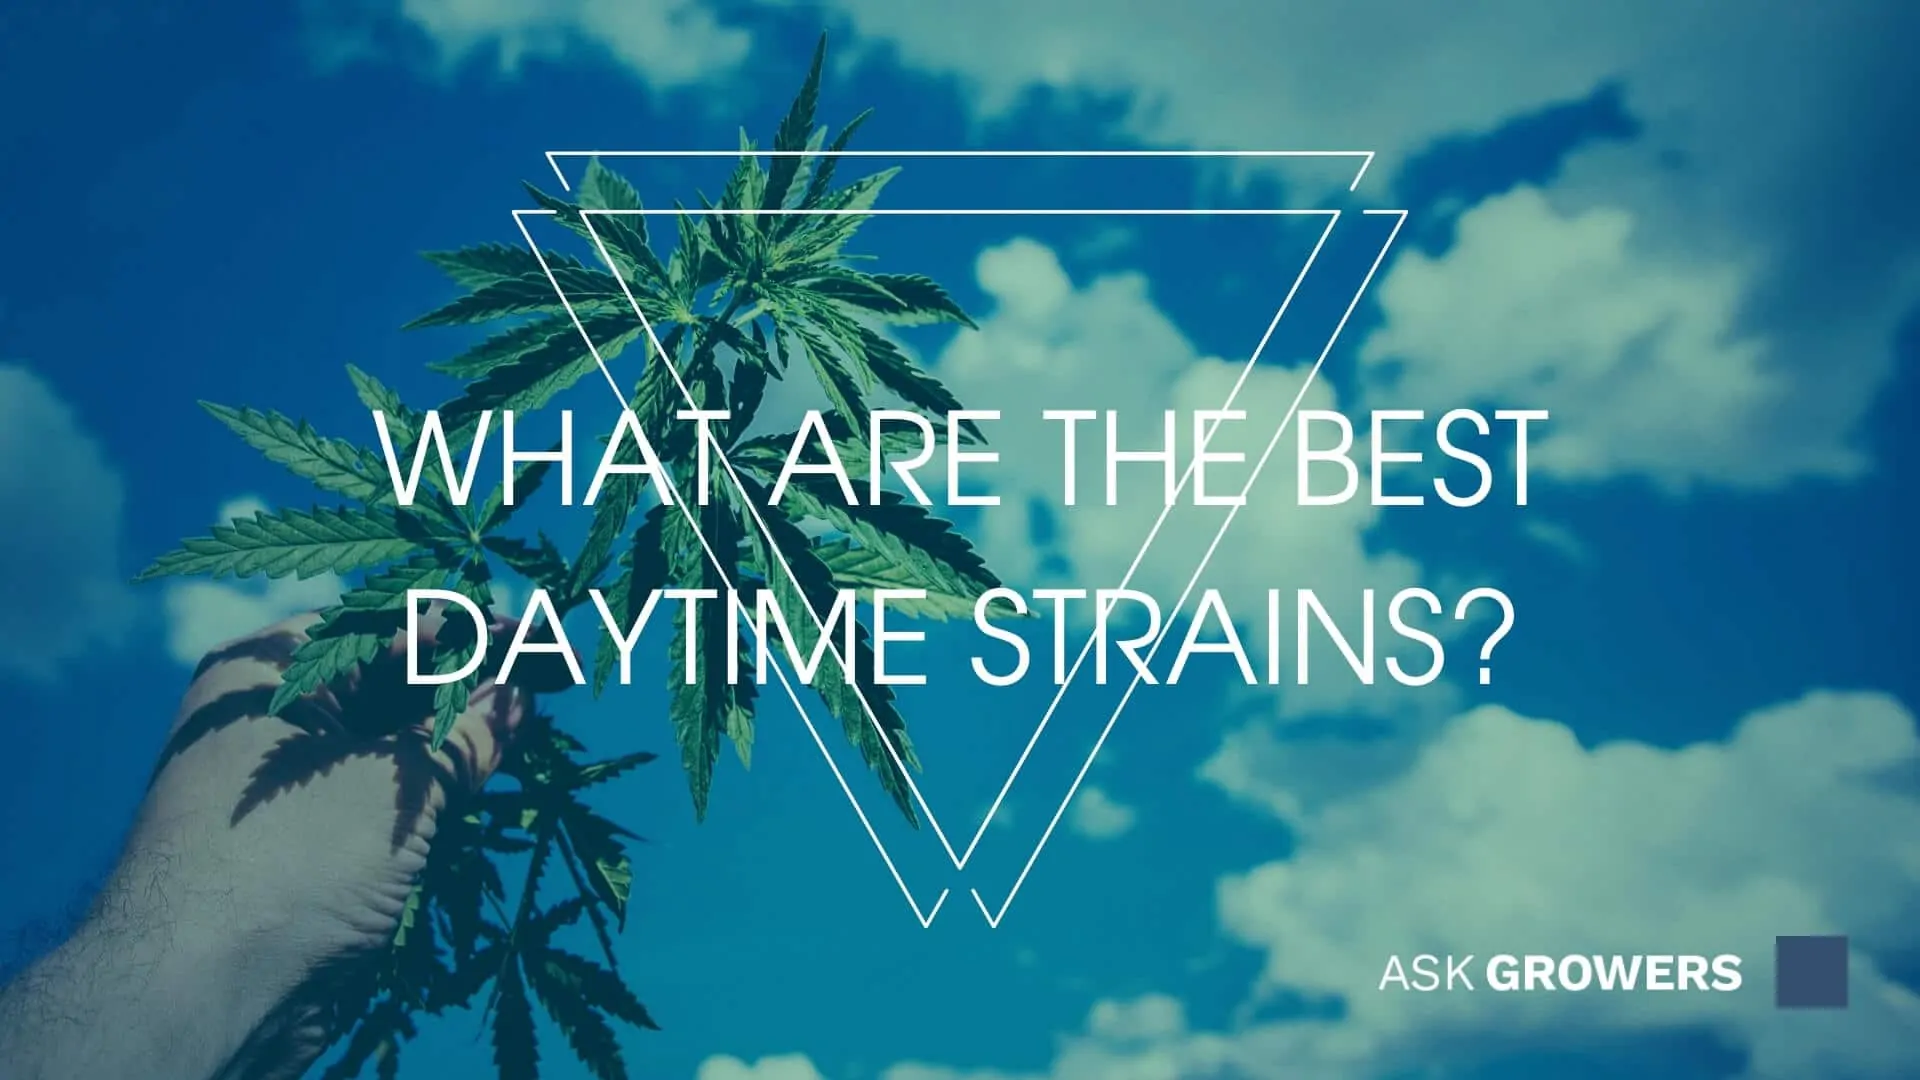 What Are the Best Daytime Weed Strains for Energy and Focus?